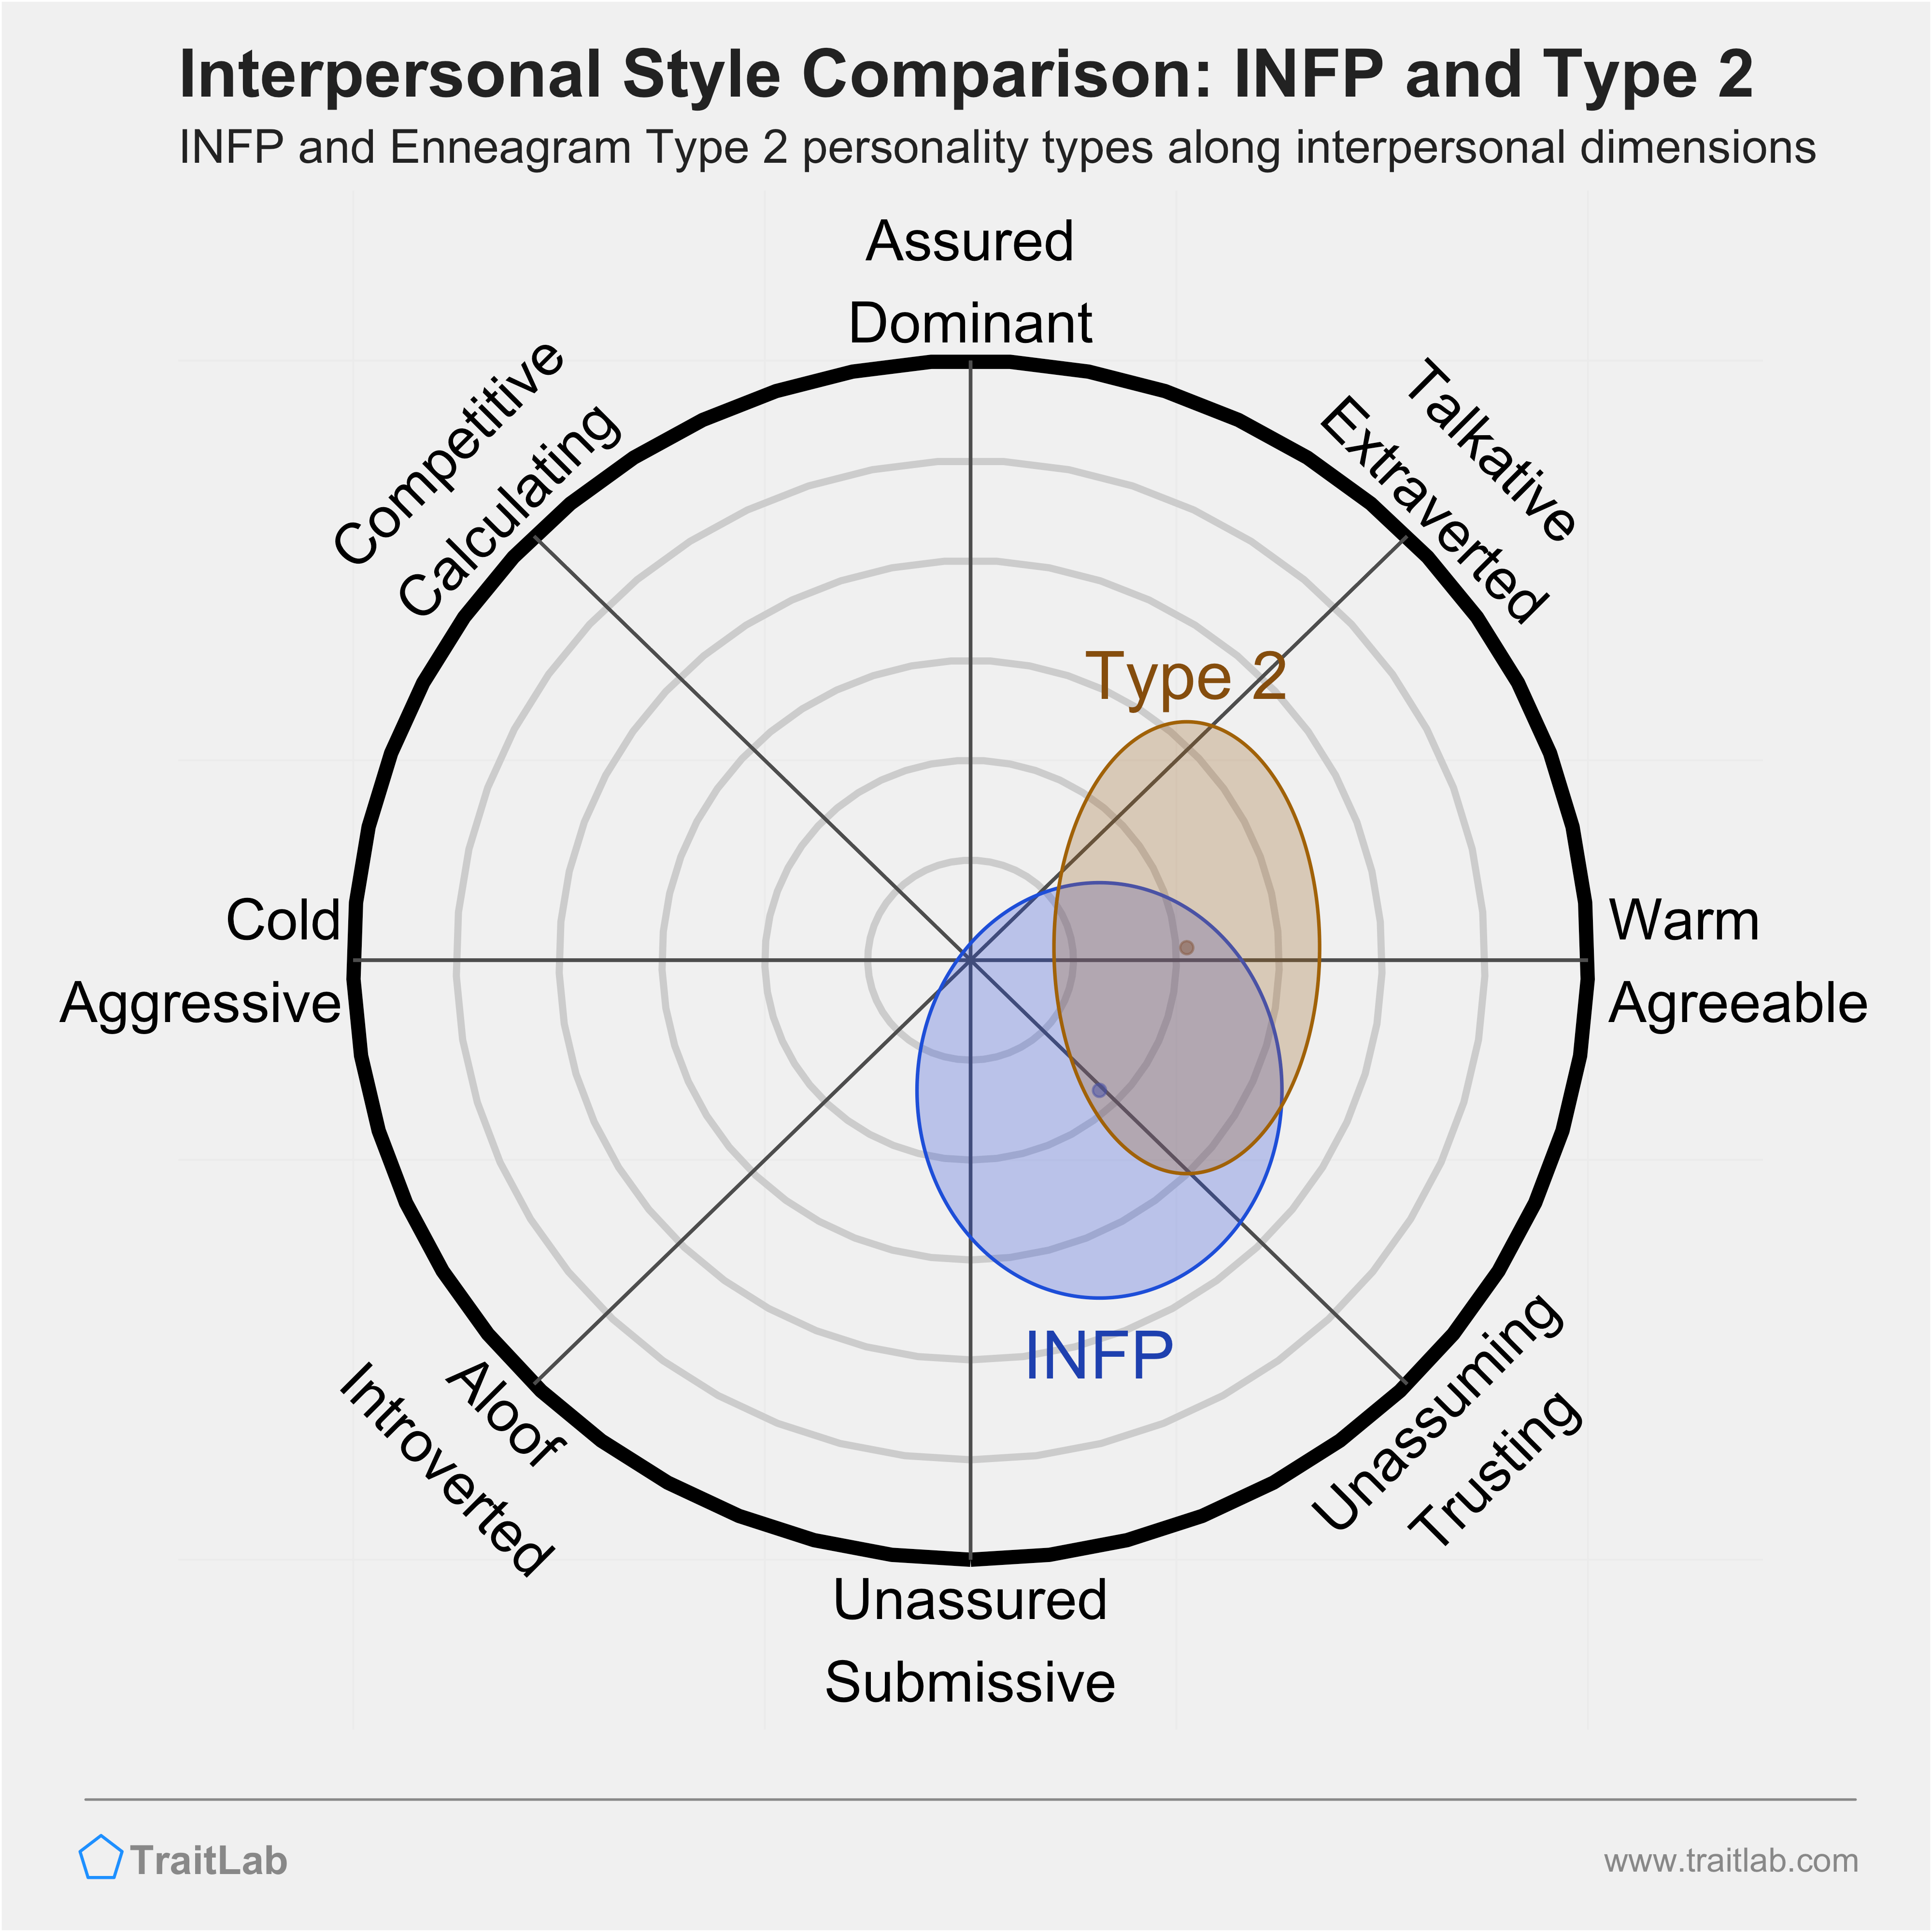 Enneagram INFP and Type 2 comparison across interpersonal dimensions